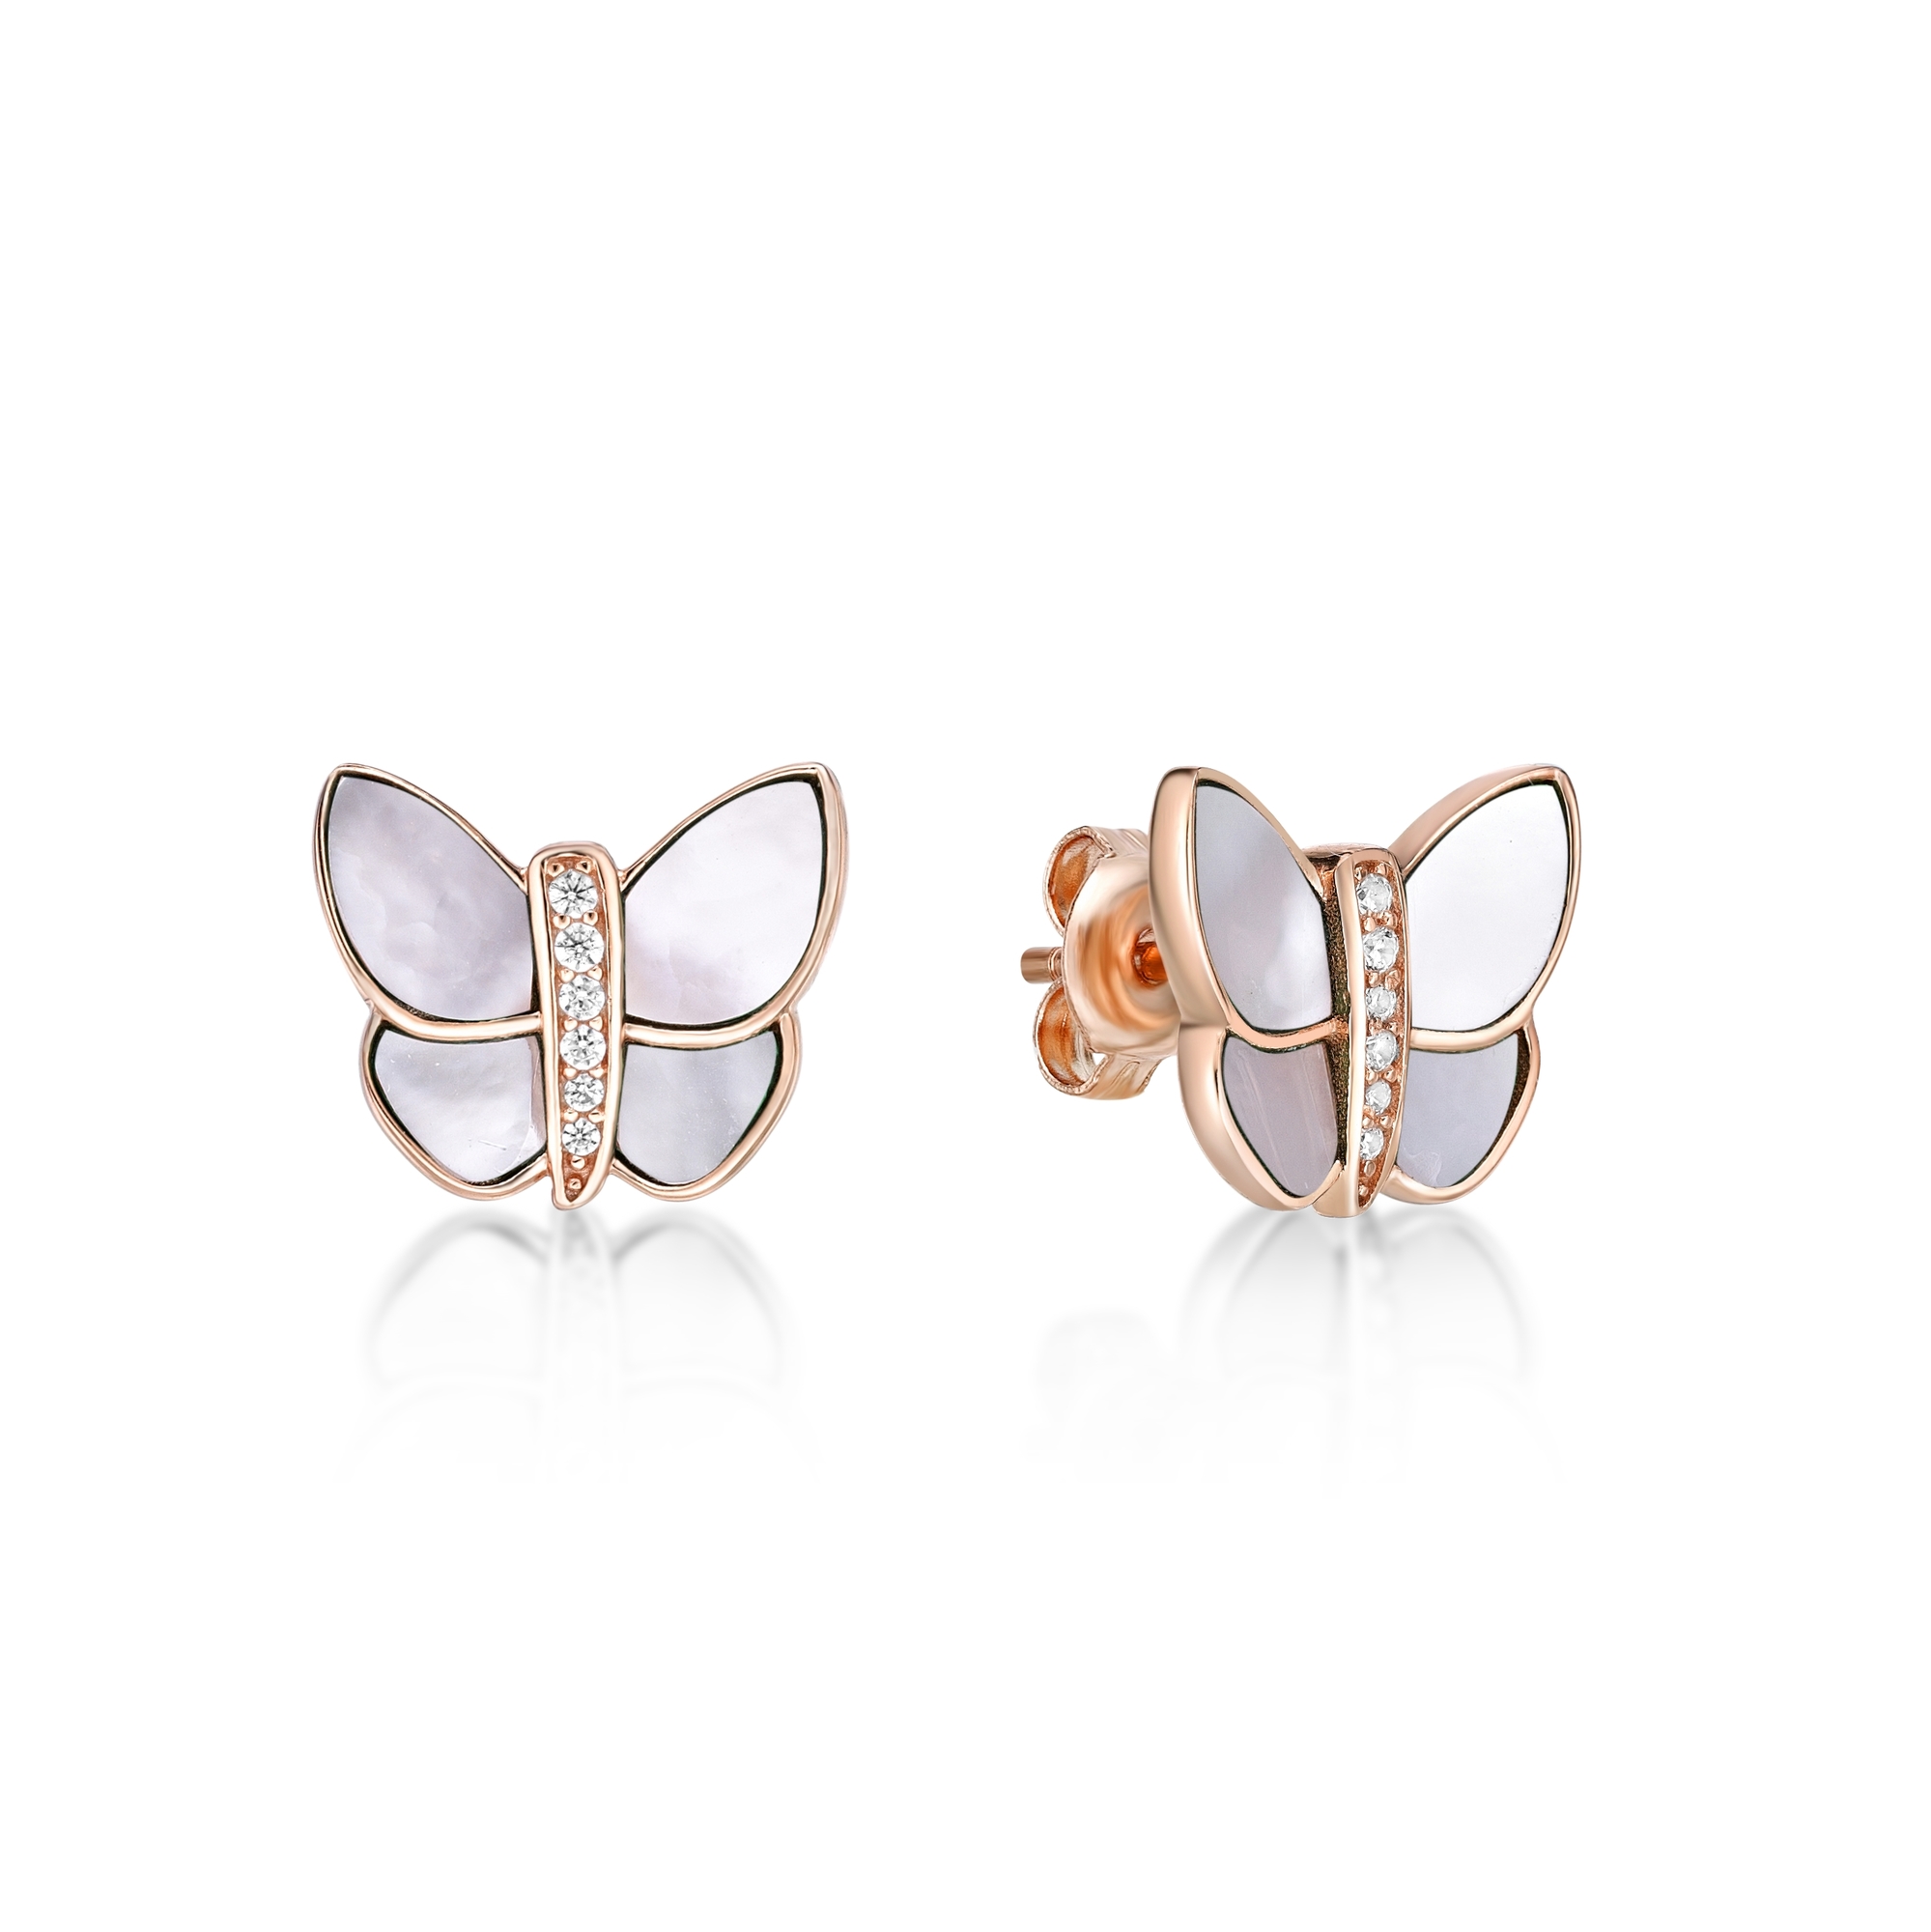 Lavari Jewelers Women’s Mother of Pearl Butterfly Stud Earrings with Friction Back, 925 Sterling Silver, Cubic Zirconia